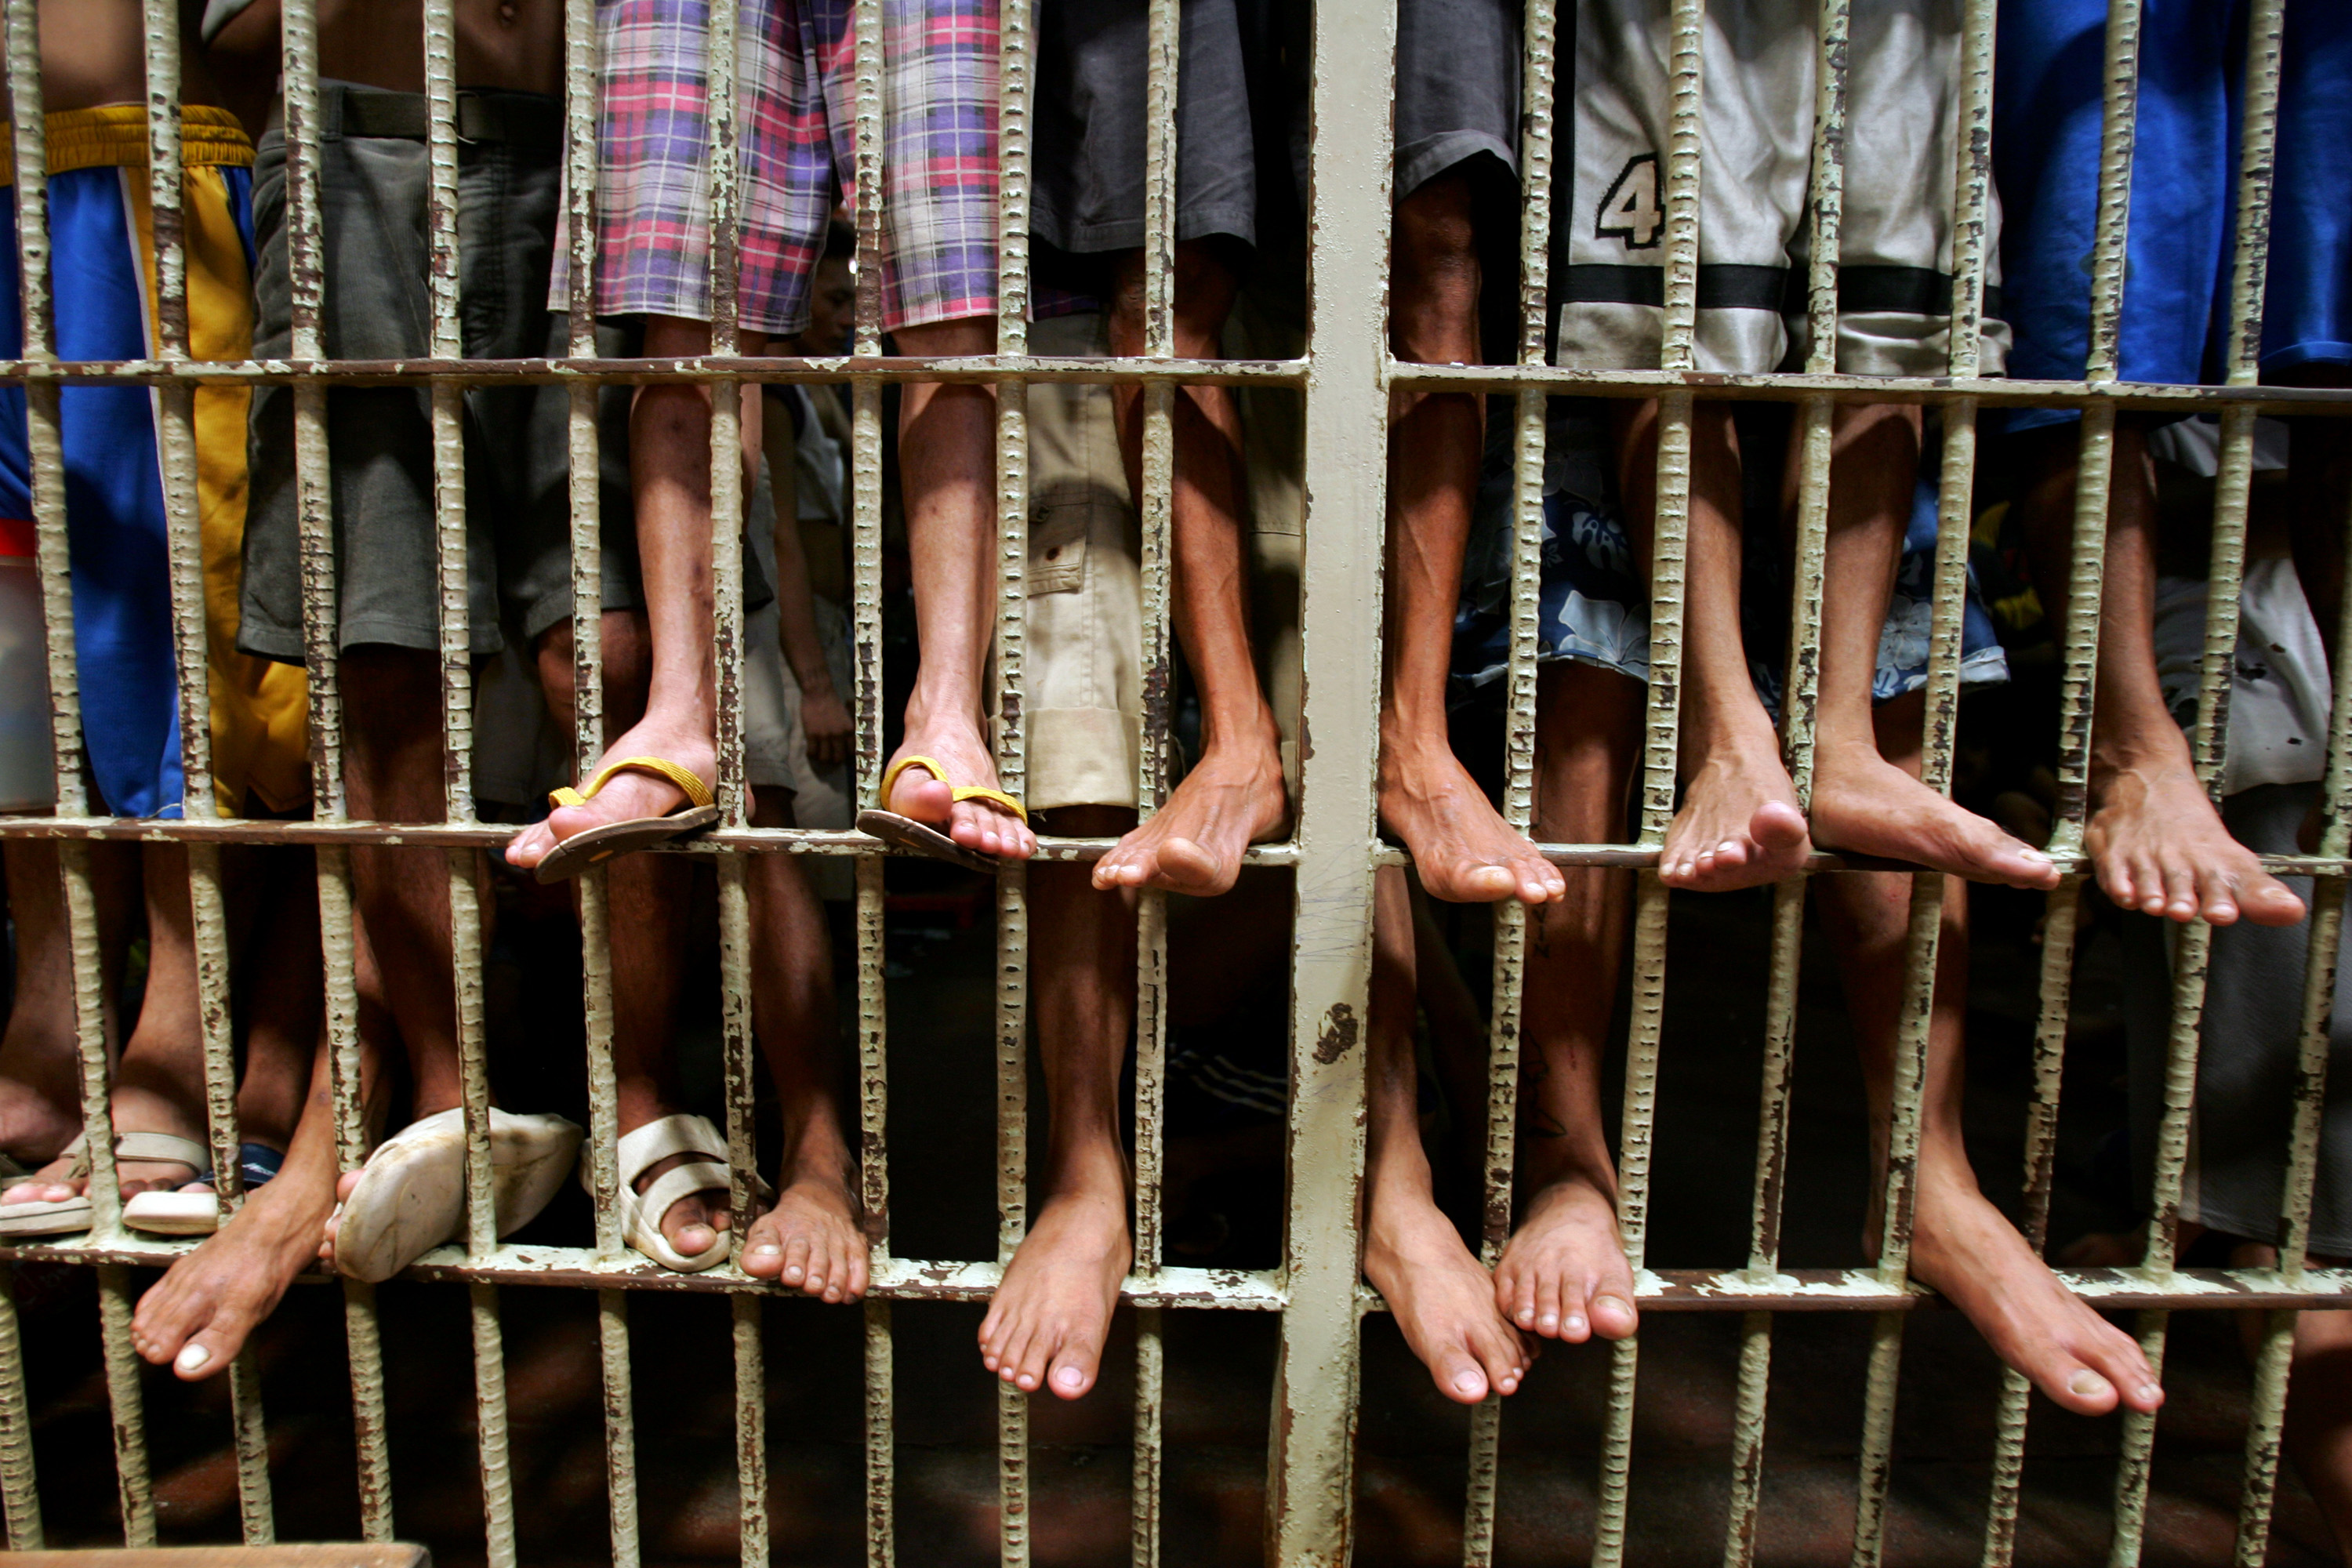 Prisoners Live In Cells Of Human Misery In Overcrowded Manila Jail